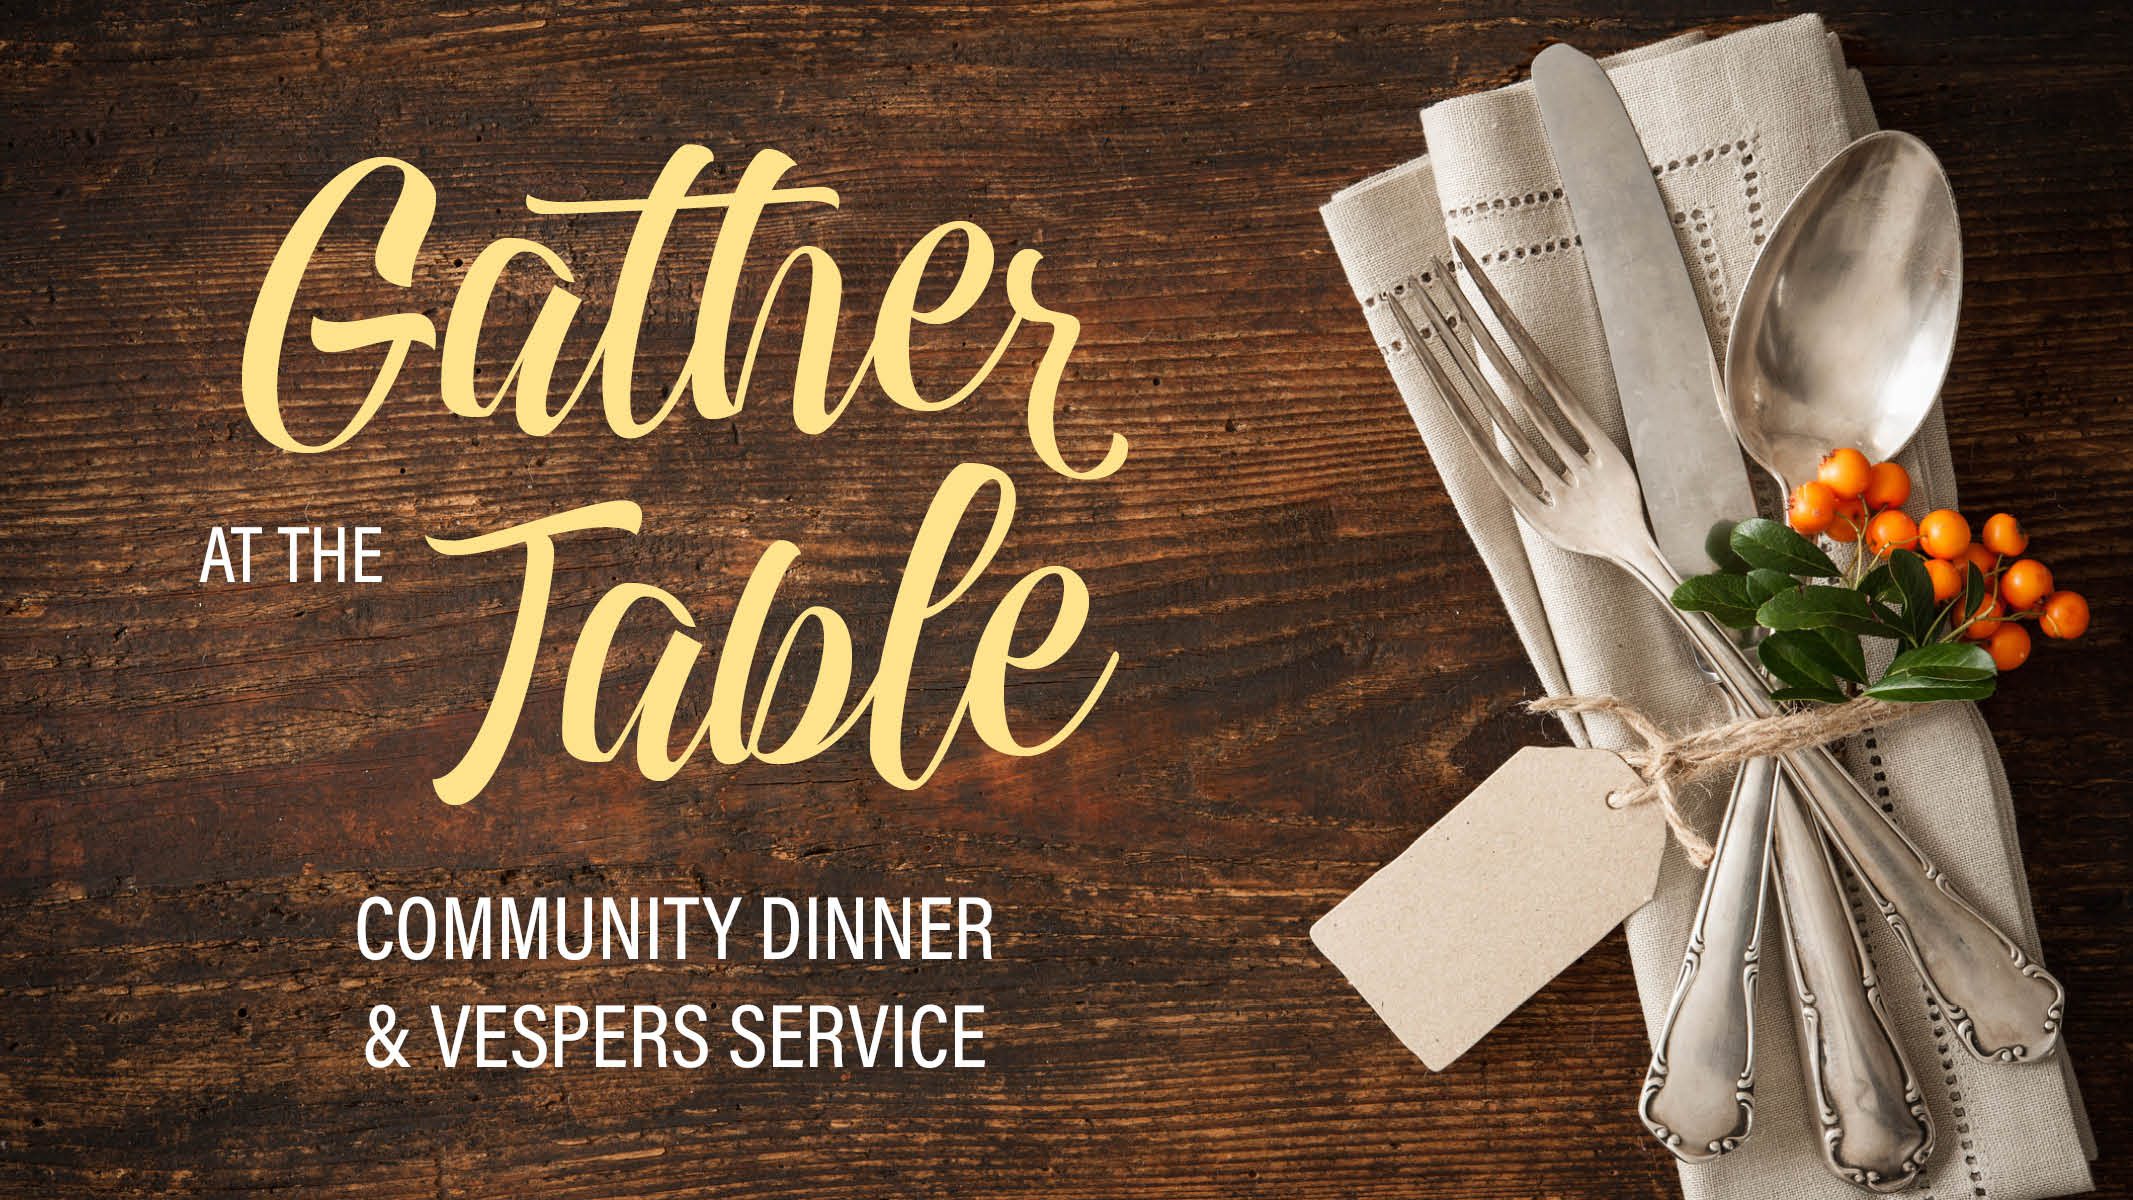 Gather at the Table: Community Dinner & Vespers Service (photo of place setting on a wooden tabletop)